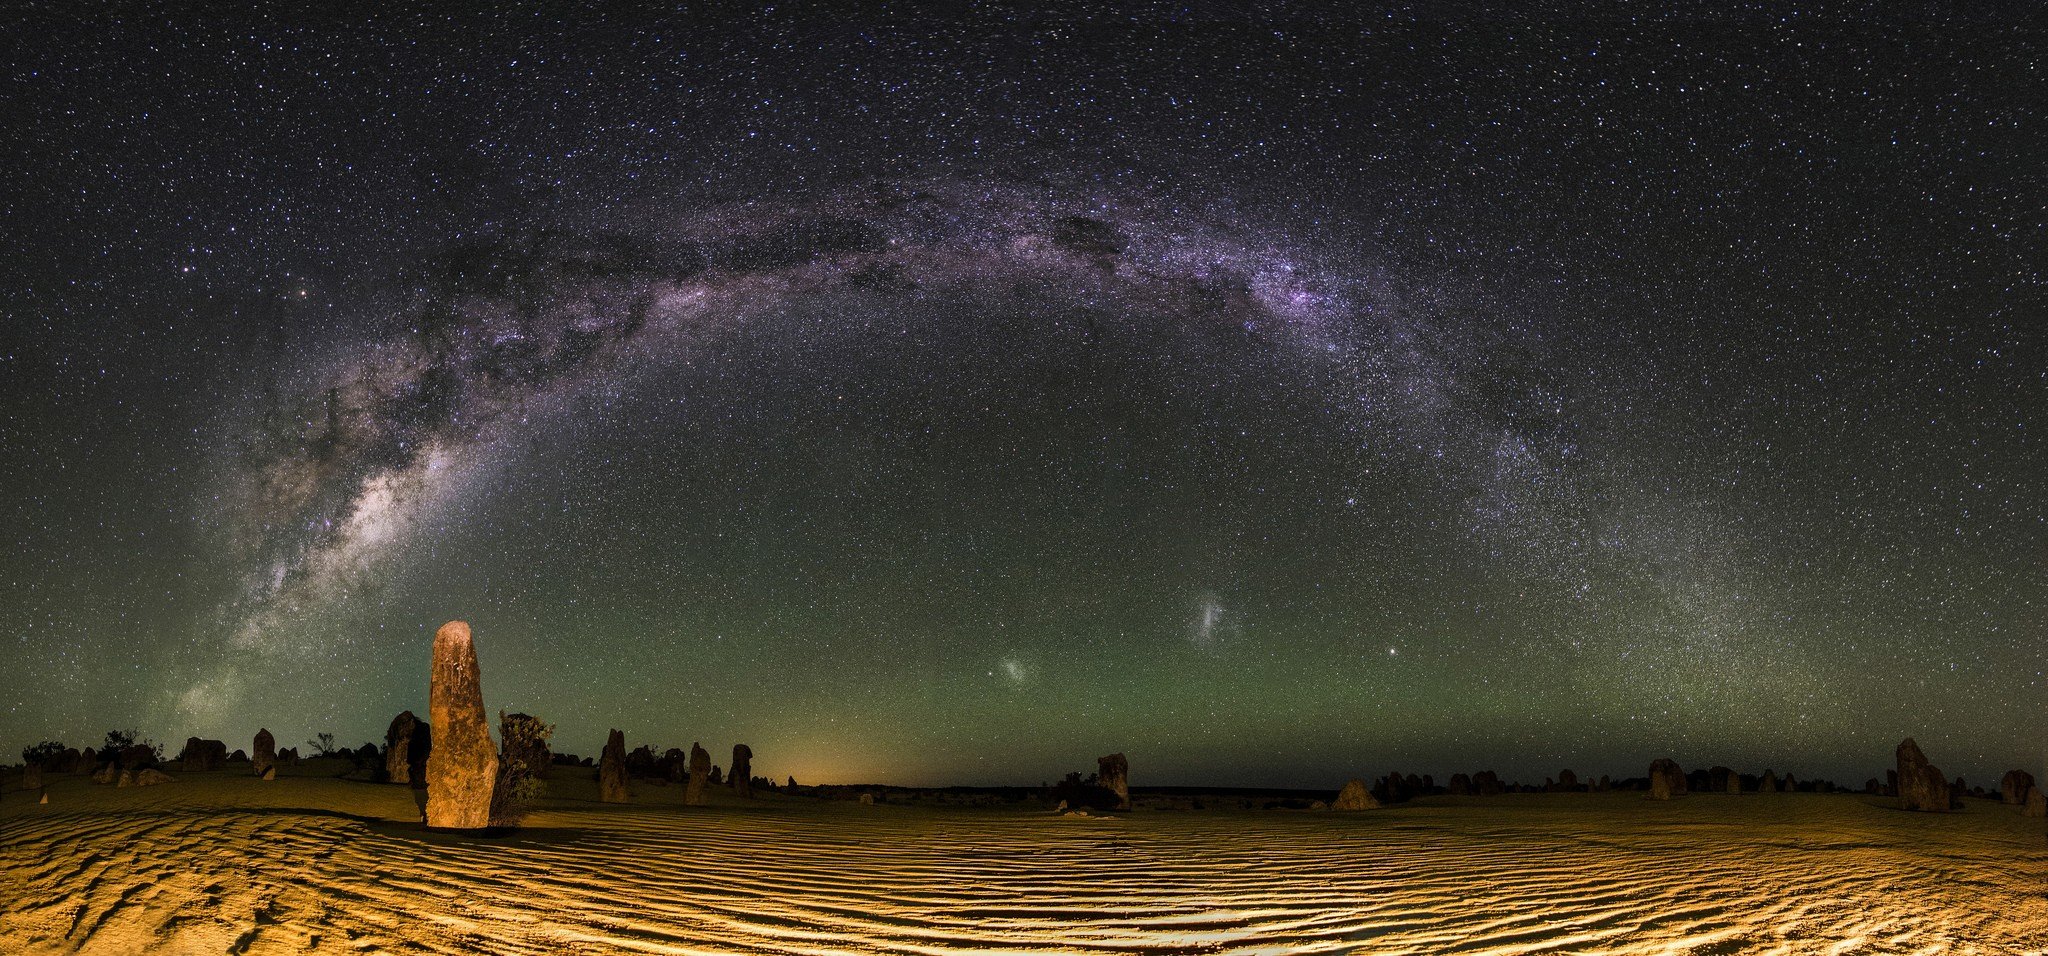 The Milky Way arching over the Large and Small Magellanic Clouds as viewed from the Pinnacles Desert in Western Australia. Credit: inefekt69 / Flickr.